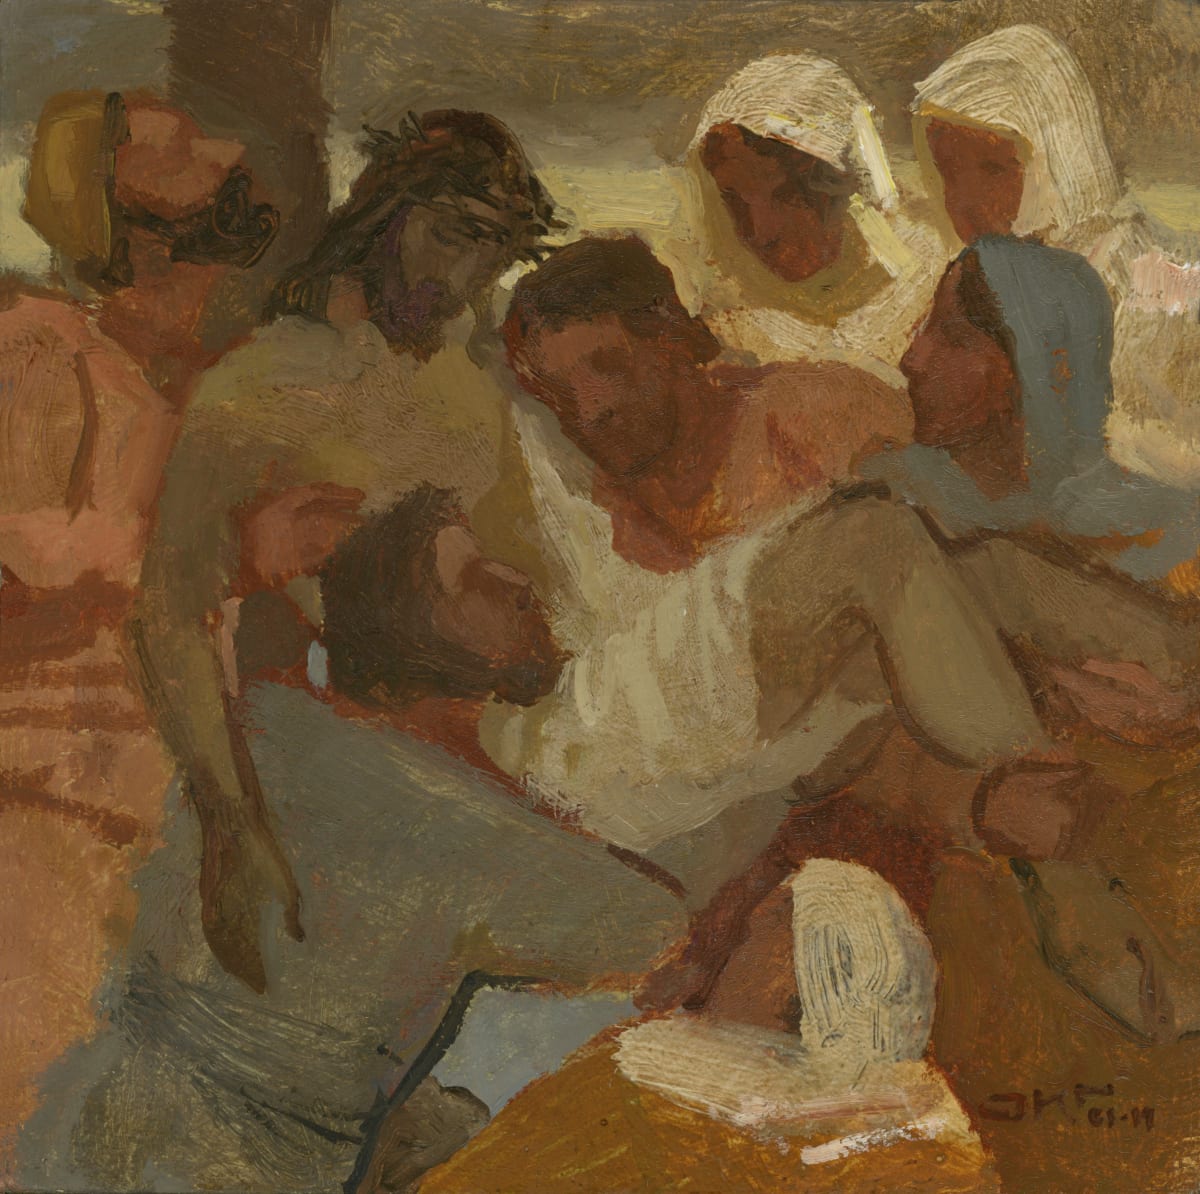 Descent from the Cross by J. Kirk Richards  Image: Christ's followers bring him down from the cross following the crucifixion. 